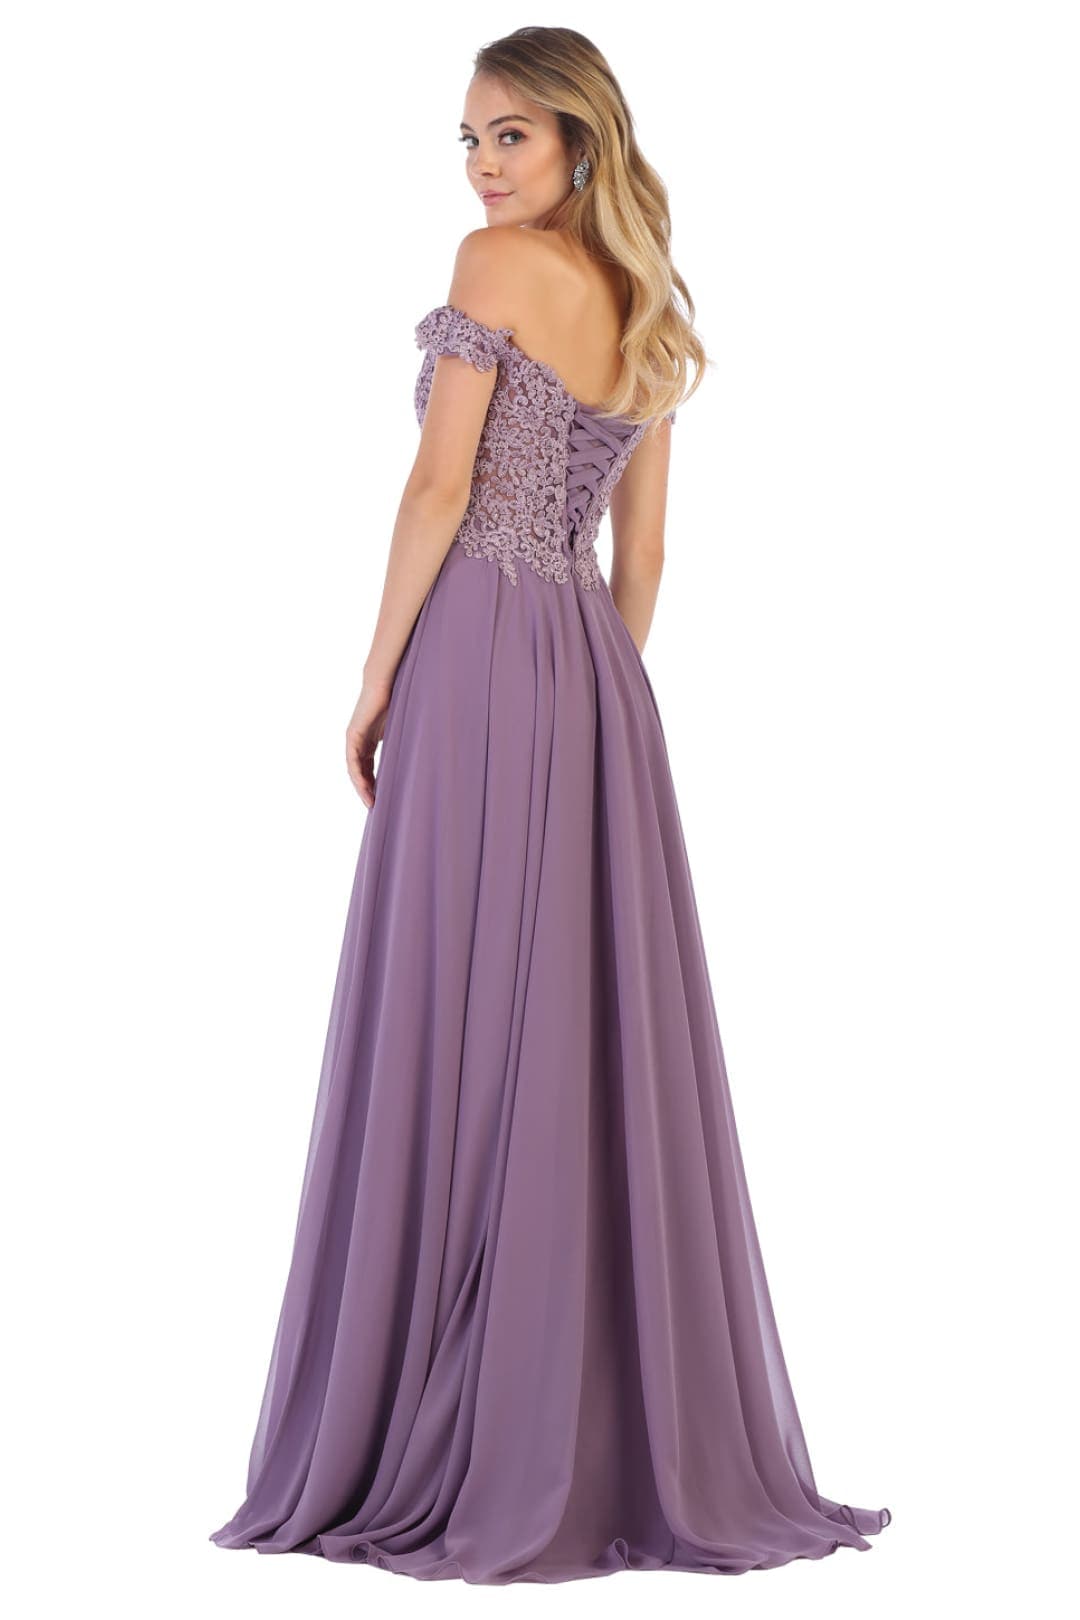 Copy of May Queen MQ1602 Off Shoulder Corset Flowy Prom Gown